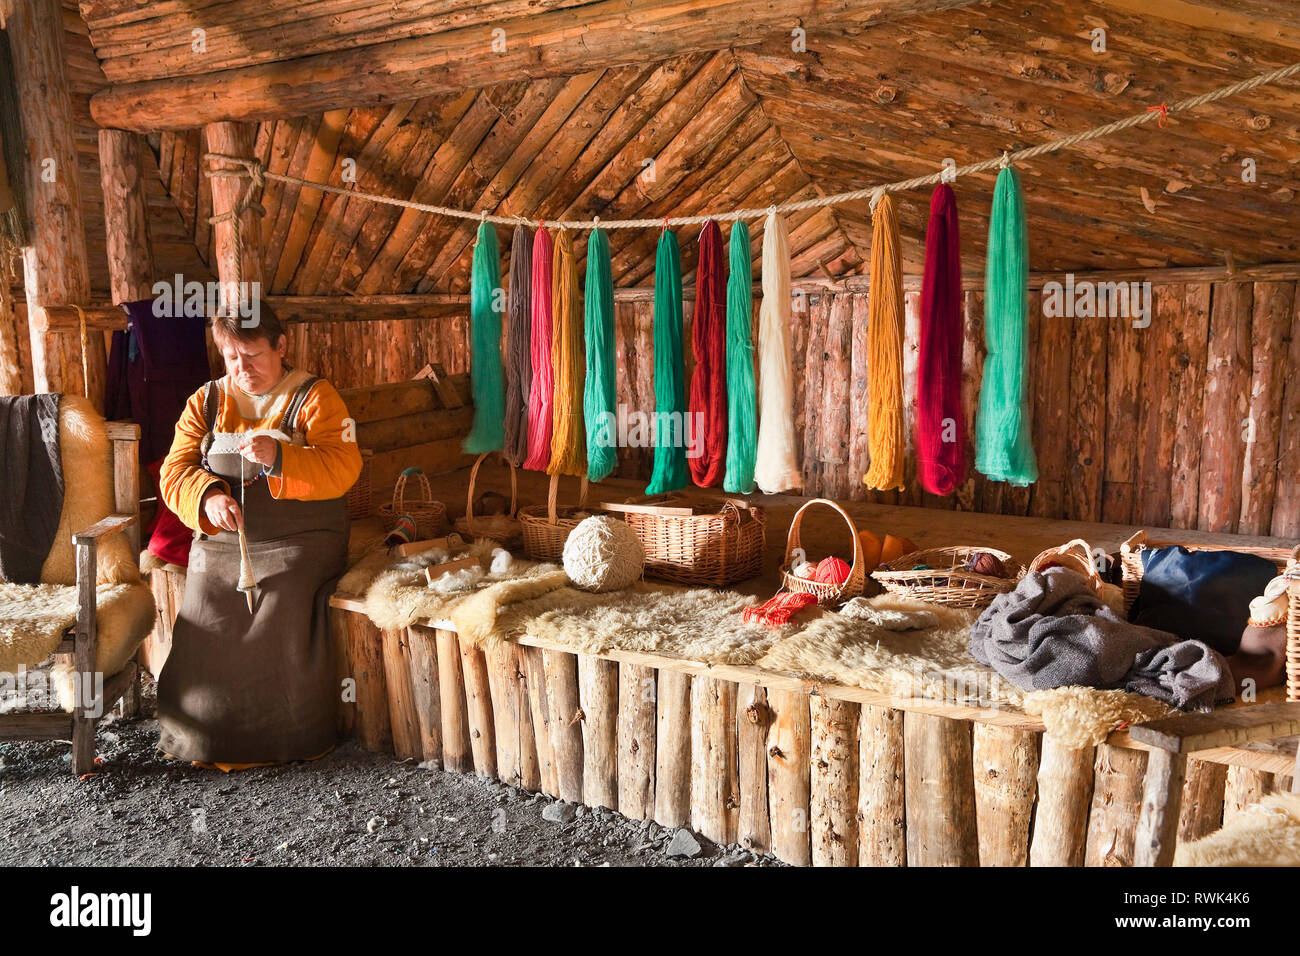 Reenactor in period costume surrounded by variously coloured yarns and handspinning a length of yarn using a drop spindle, Norstead Viking Village and Port of Trade, L'Anse aux Meadows, Newfoundland, Canada Stock Photo